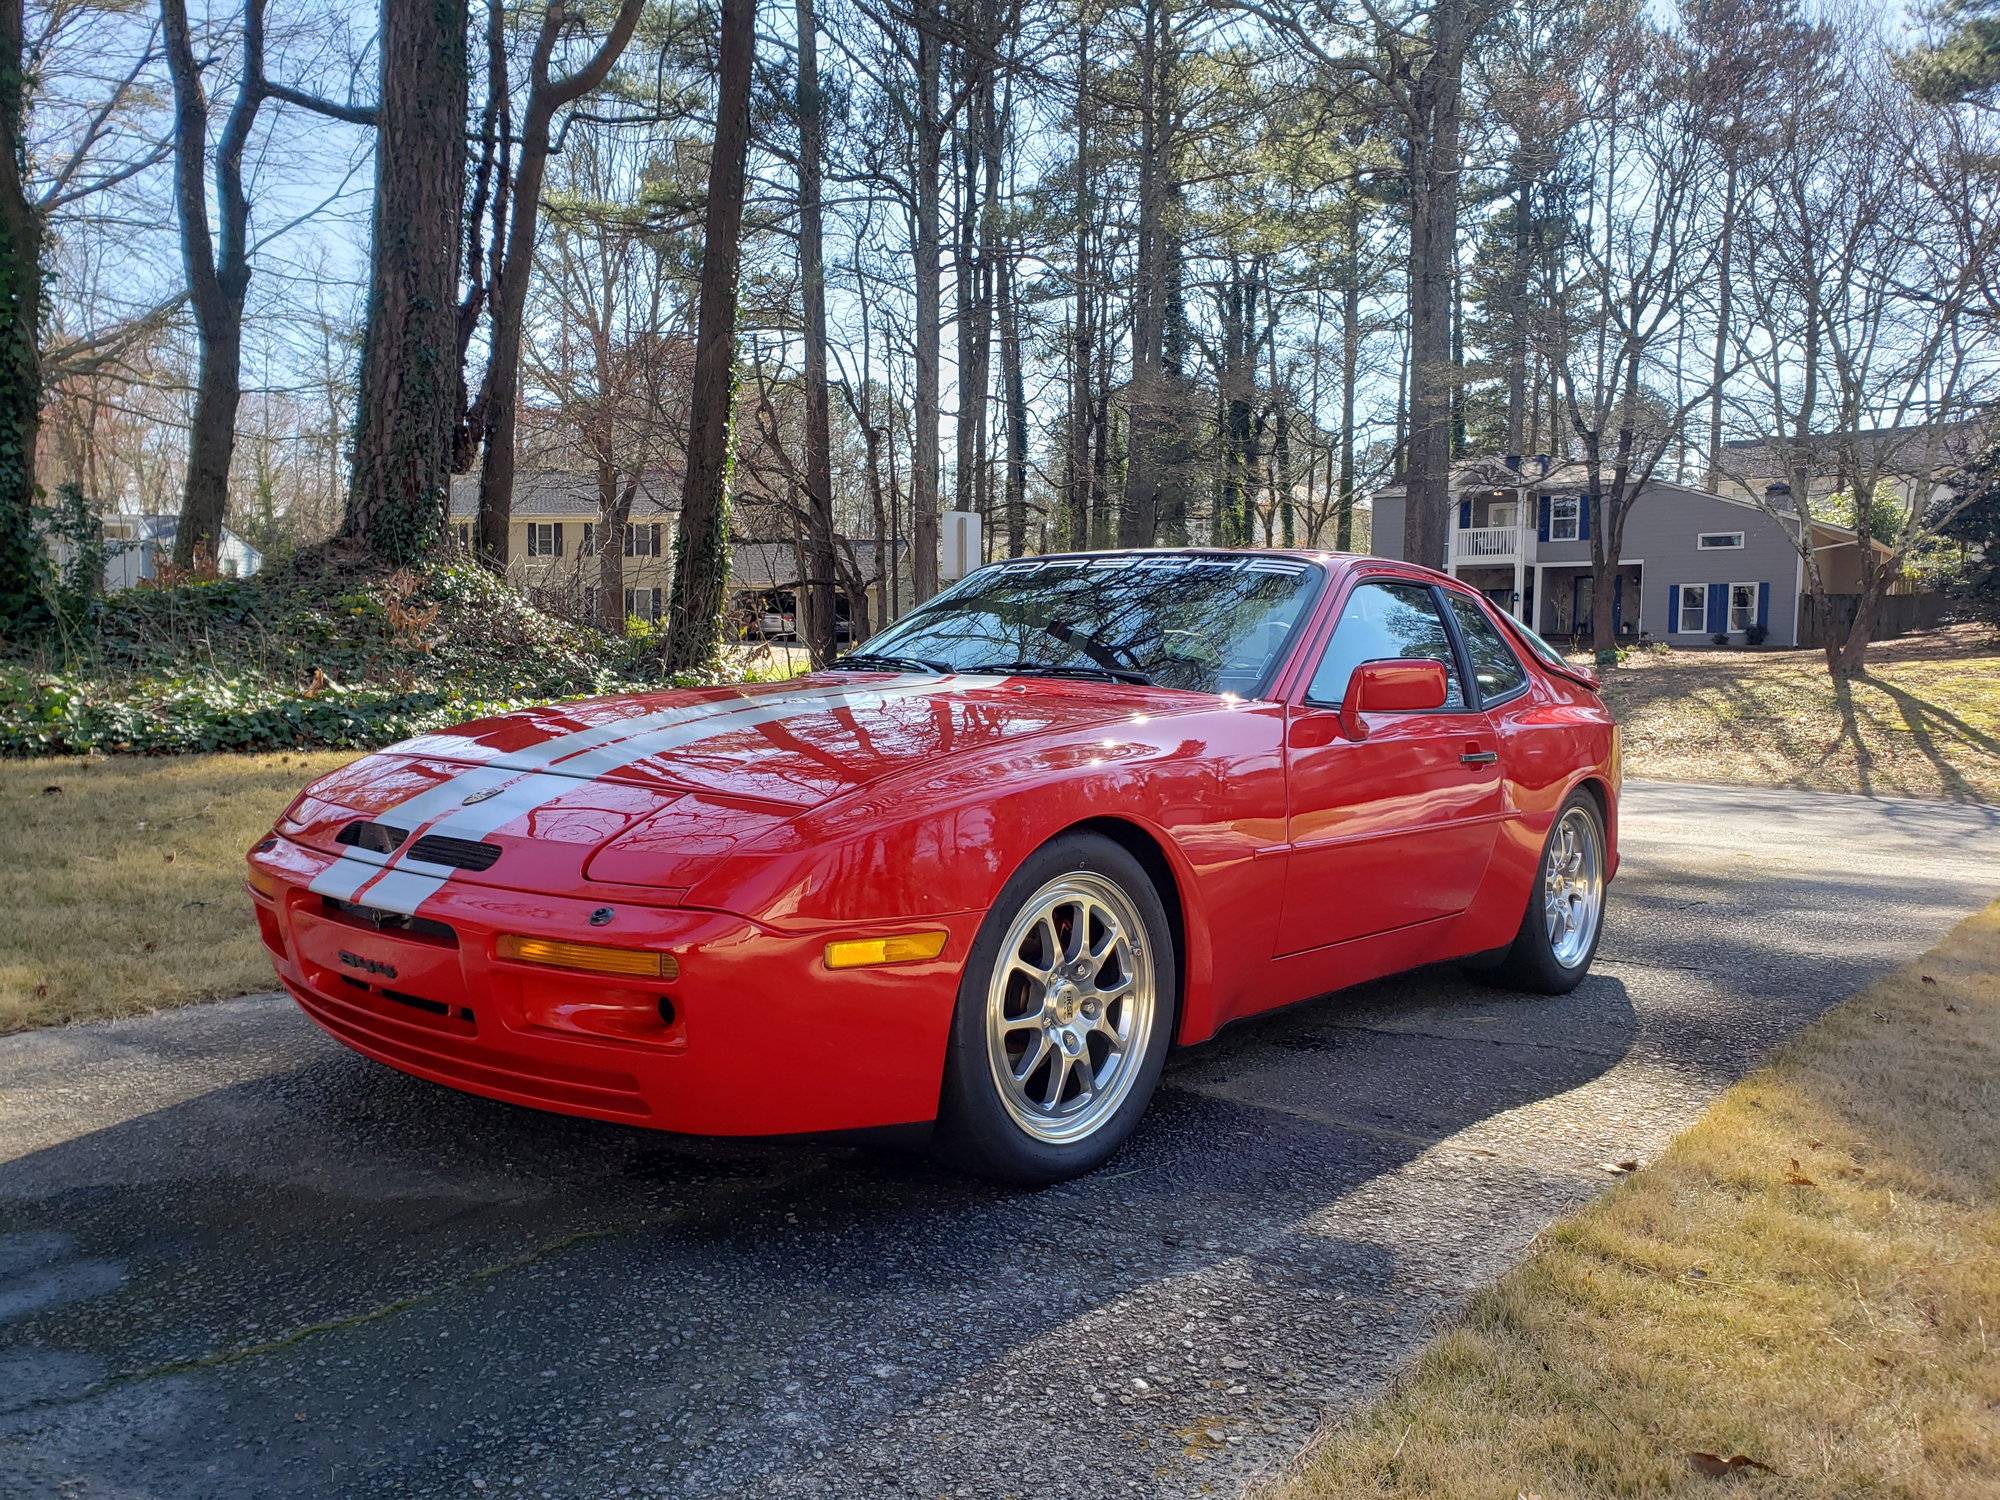 1986 Porsche 944 - The Ultimate 944 Turbo for Street & Track - Used - VIN WP0AA095XGN150162 - 138,000 Miles - 4 cyl - 2WD - Manual - Coupe - Red - Marietta, GA 30062, United States